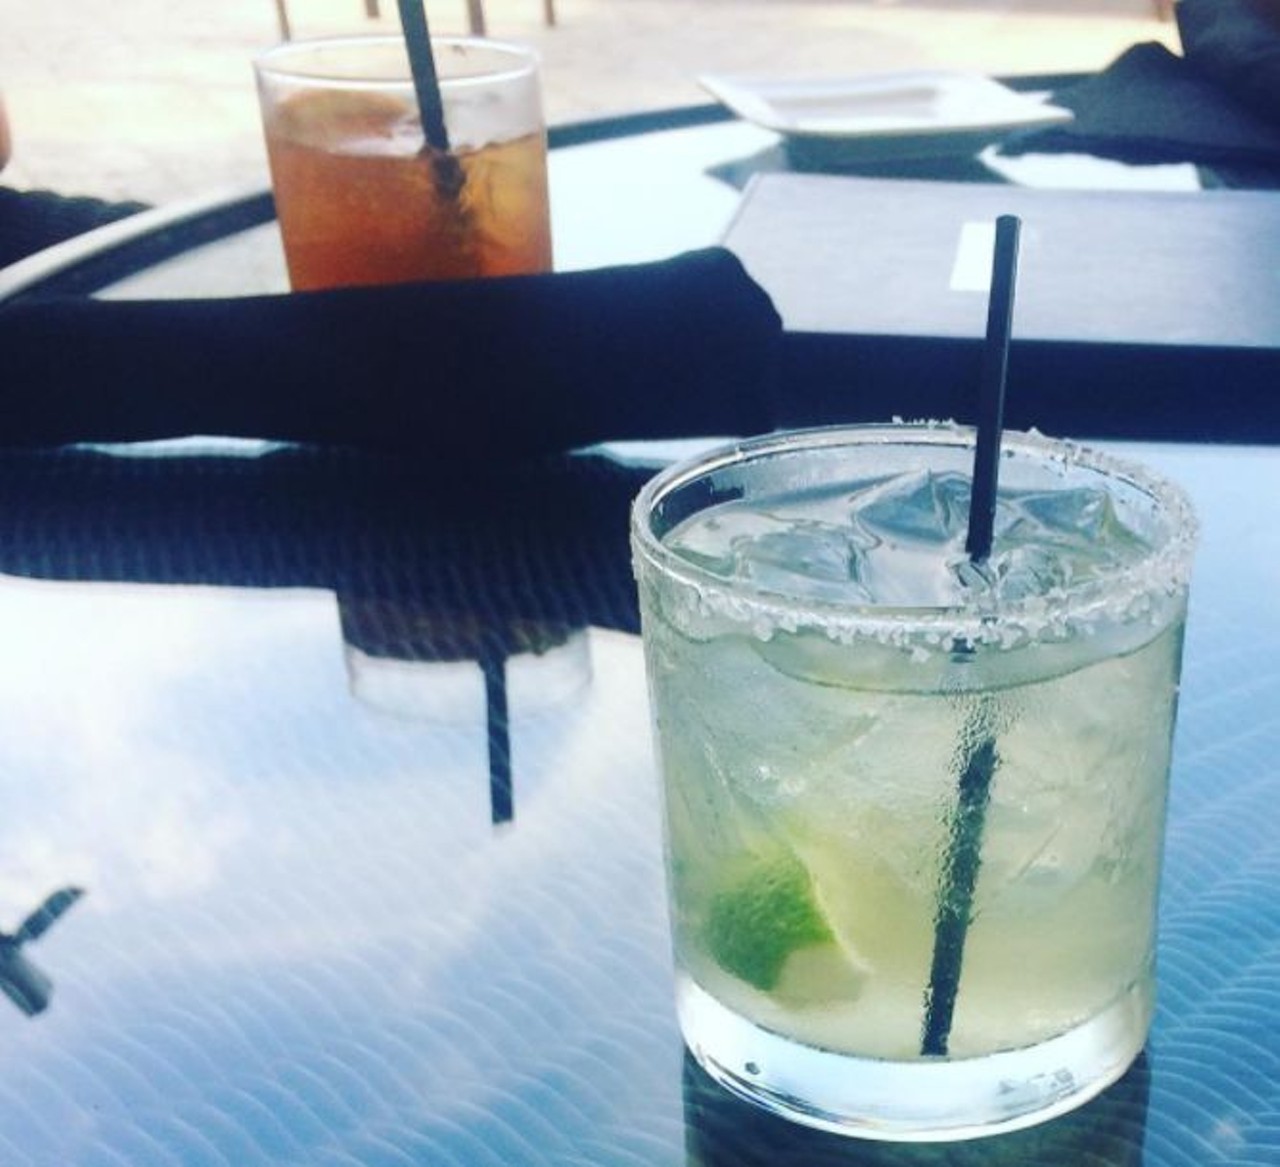 Eleven at Reunion Resort
What to Drink: Margarita on the Rocks
Photo via bluesaysmeow/Facebook